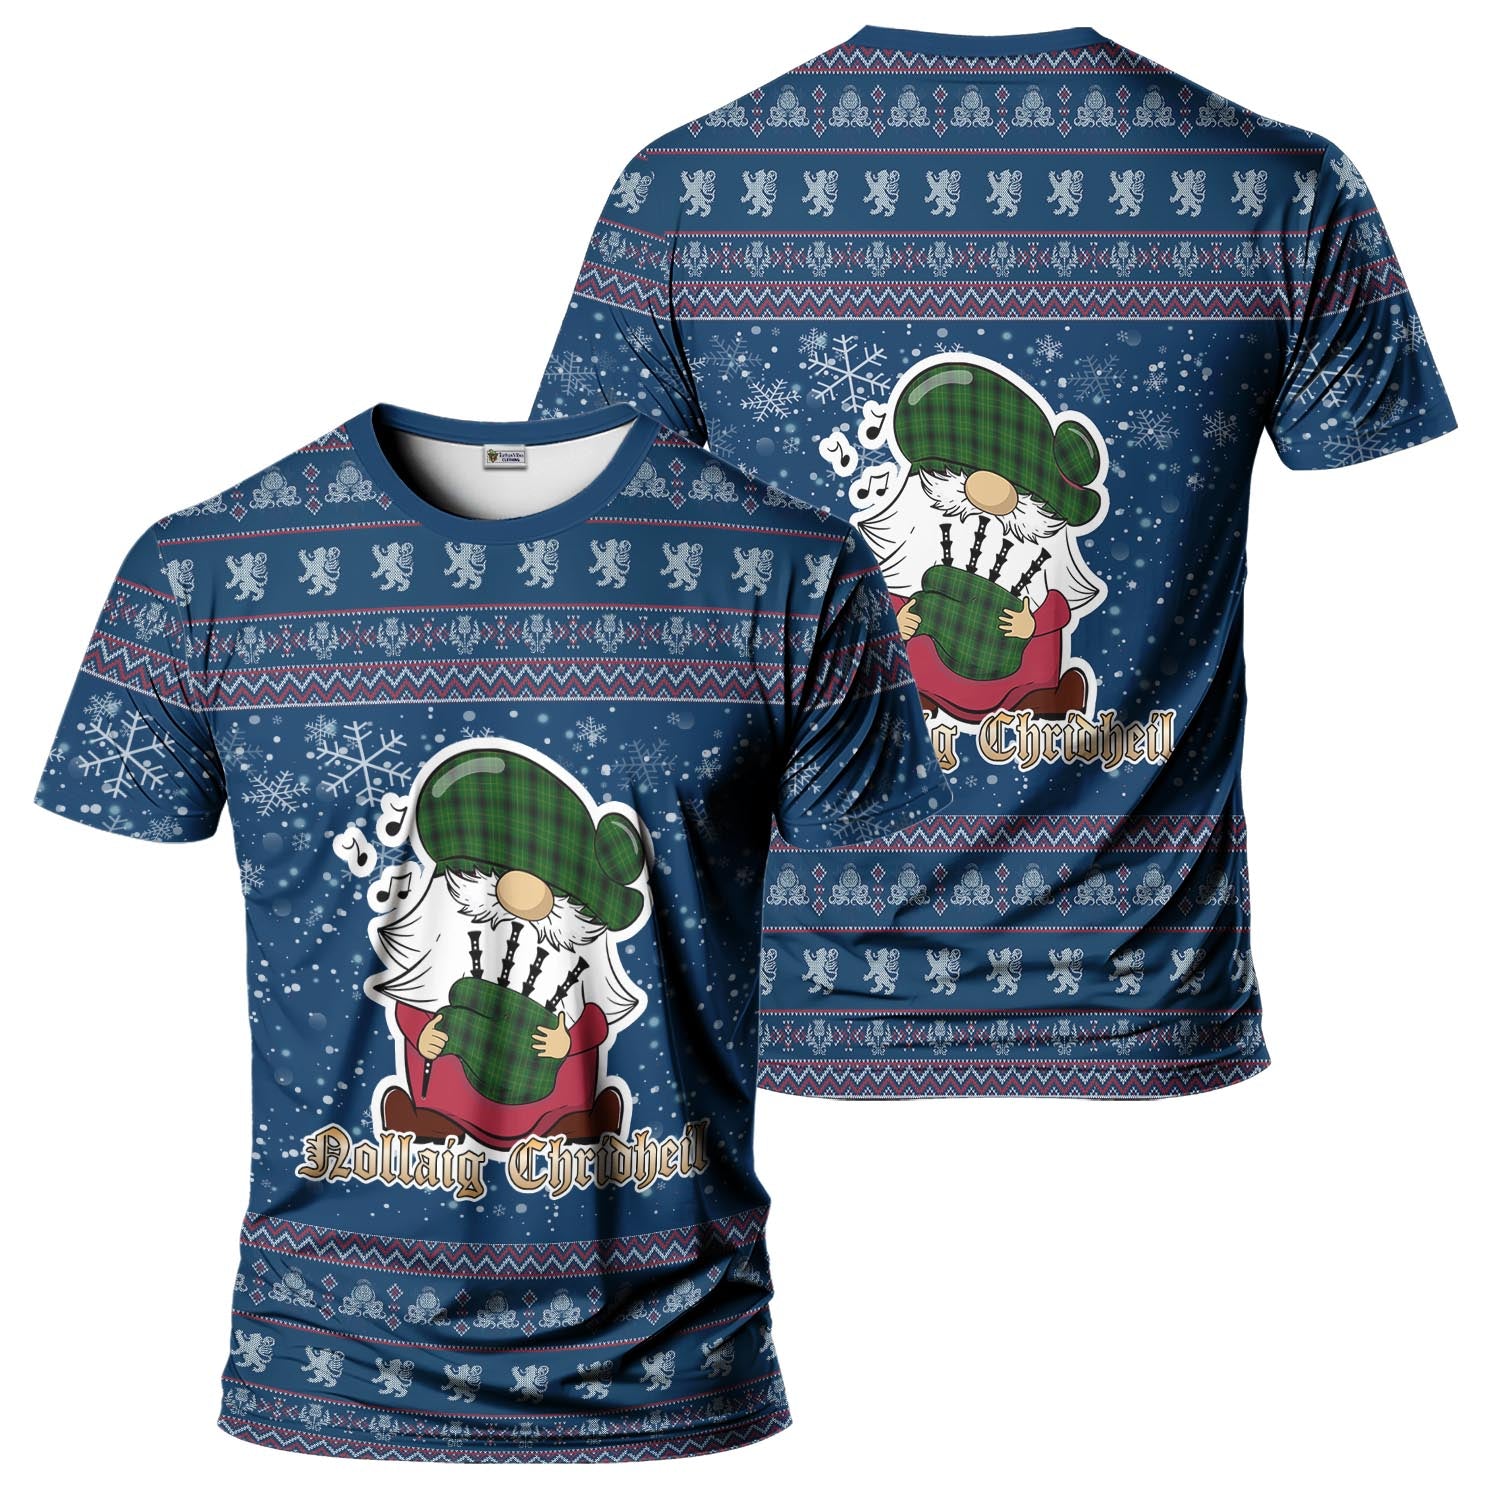 MacArthur Highland Clan Christmas Family T-Shirt with Funny Gnome Playing Bagpipes Kid's Shirt Blue - Tartanvibesclothing